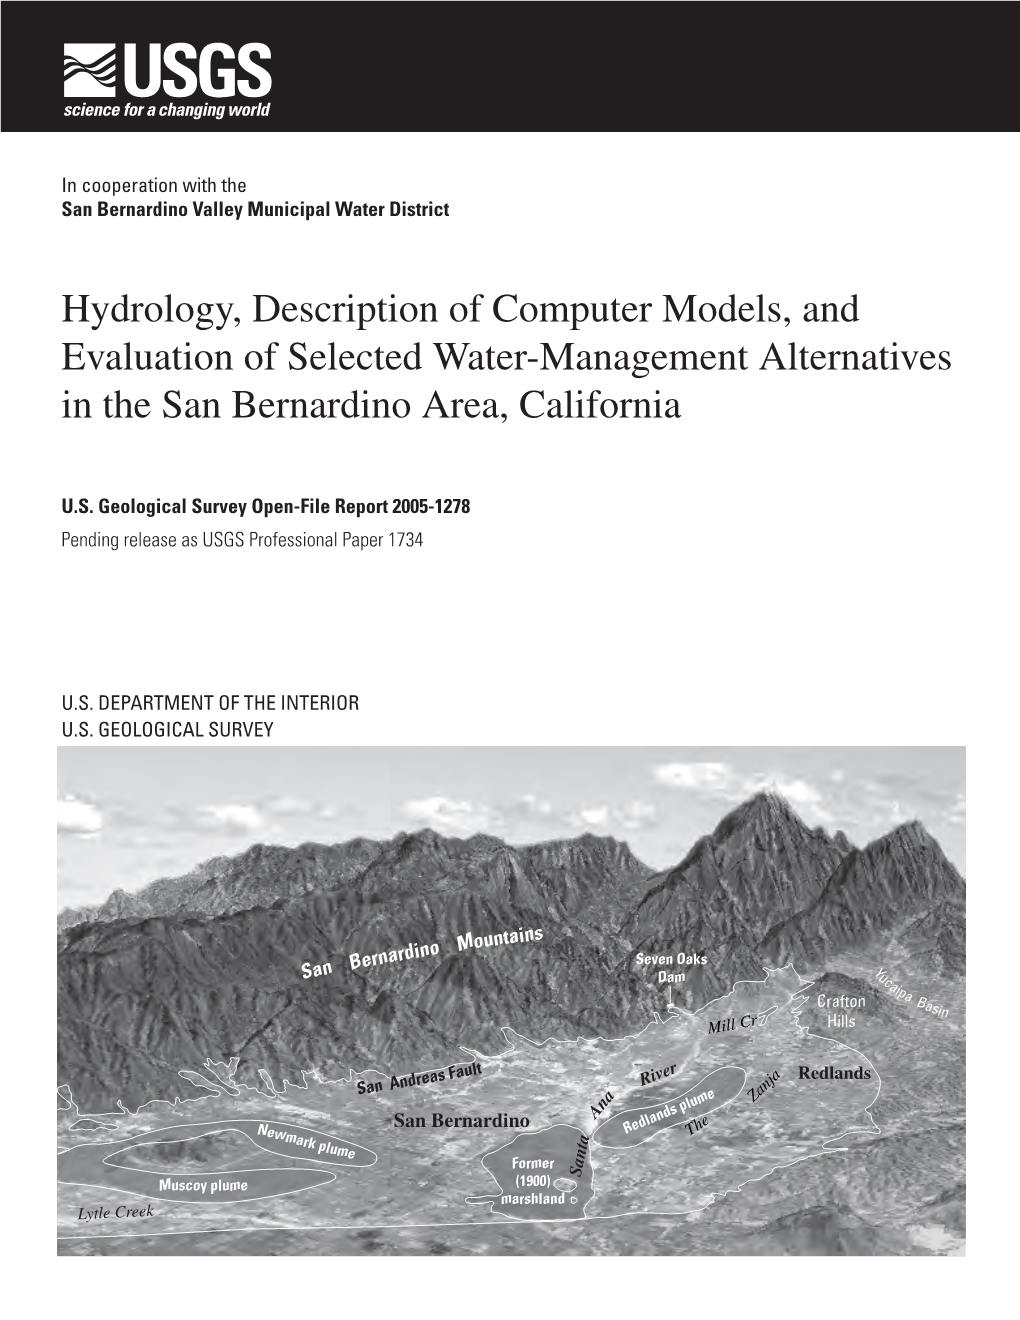 Hydrology, Description of Computer Models, and Evaluation of Selected Water-Management Alternatives in the San Bernardino Area, California